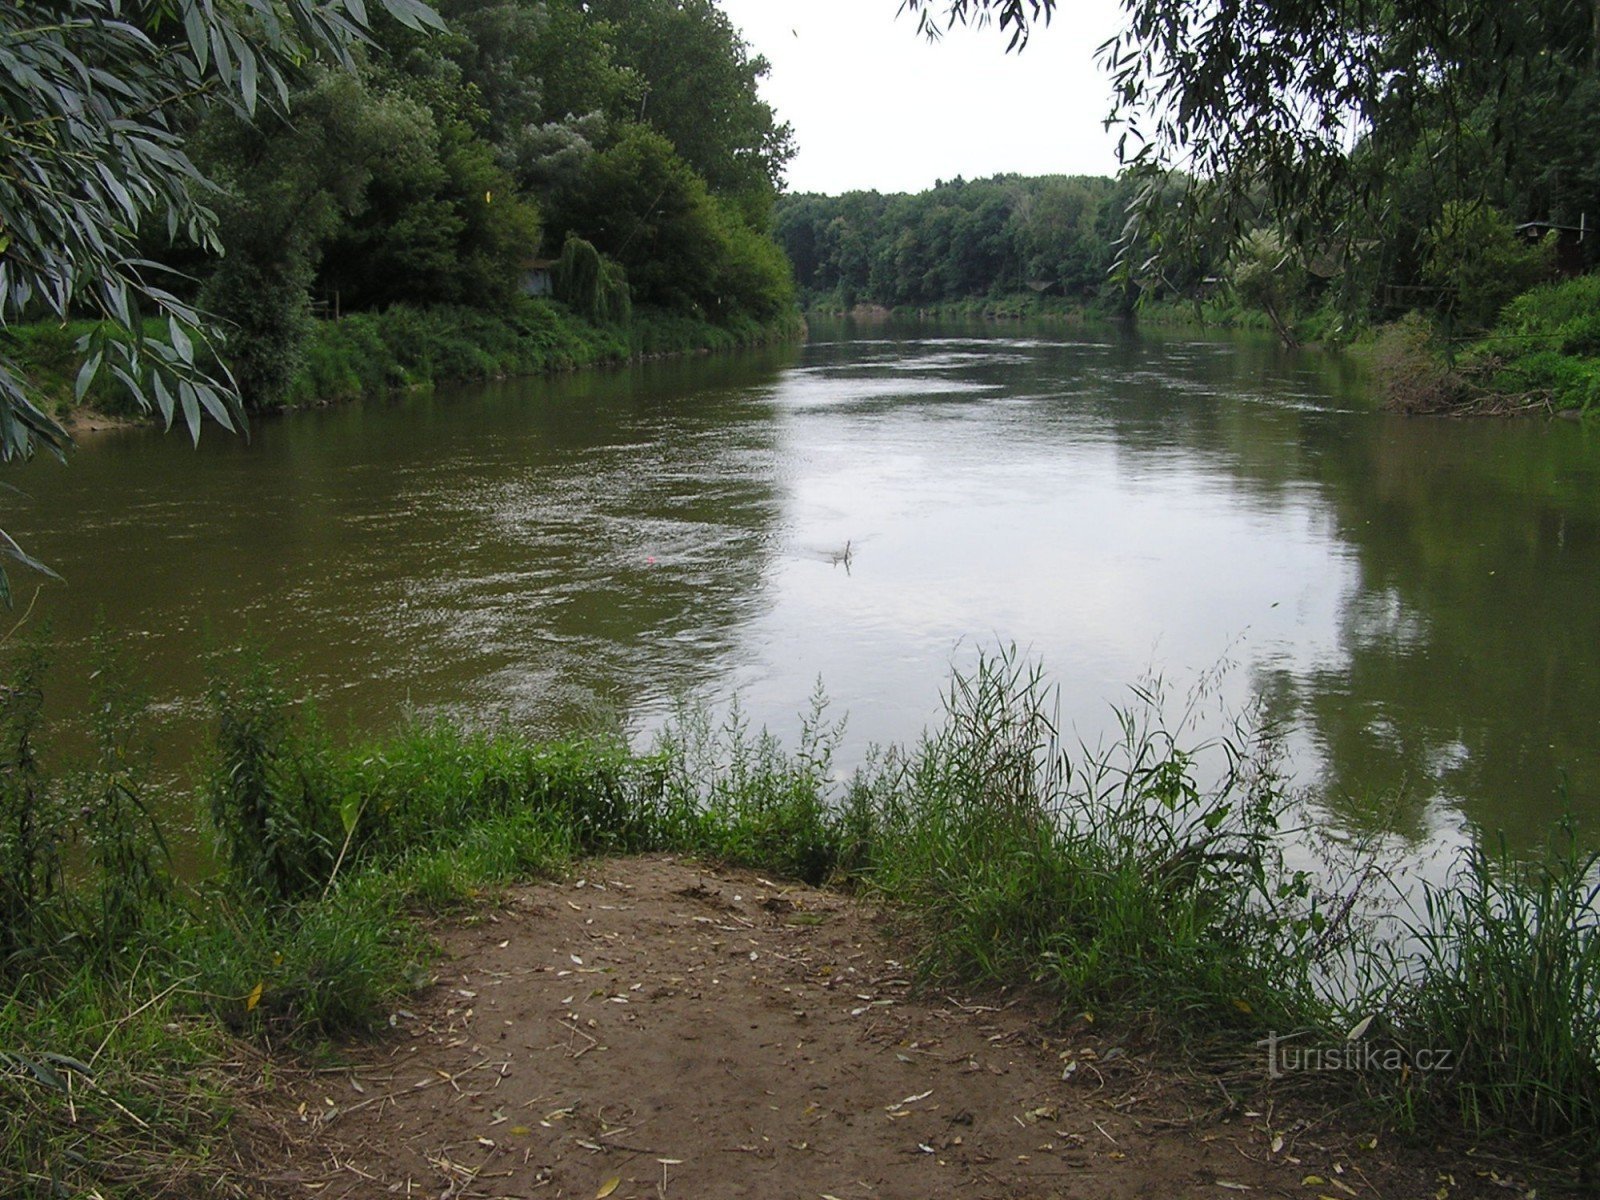 Confluence - the confluence of the Morava and the Dyje